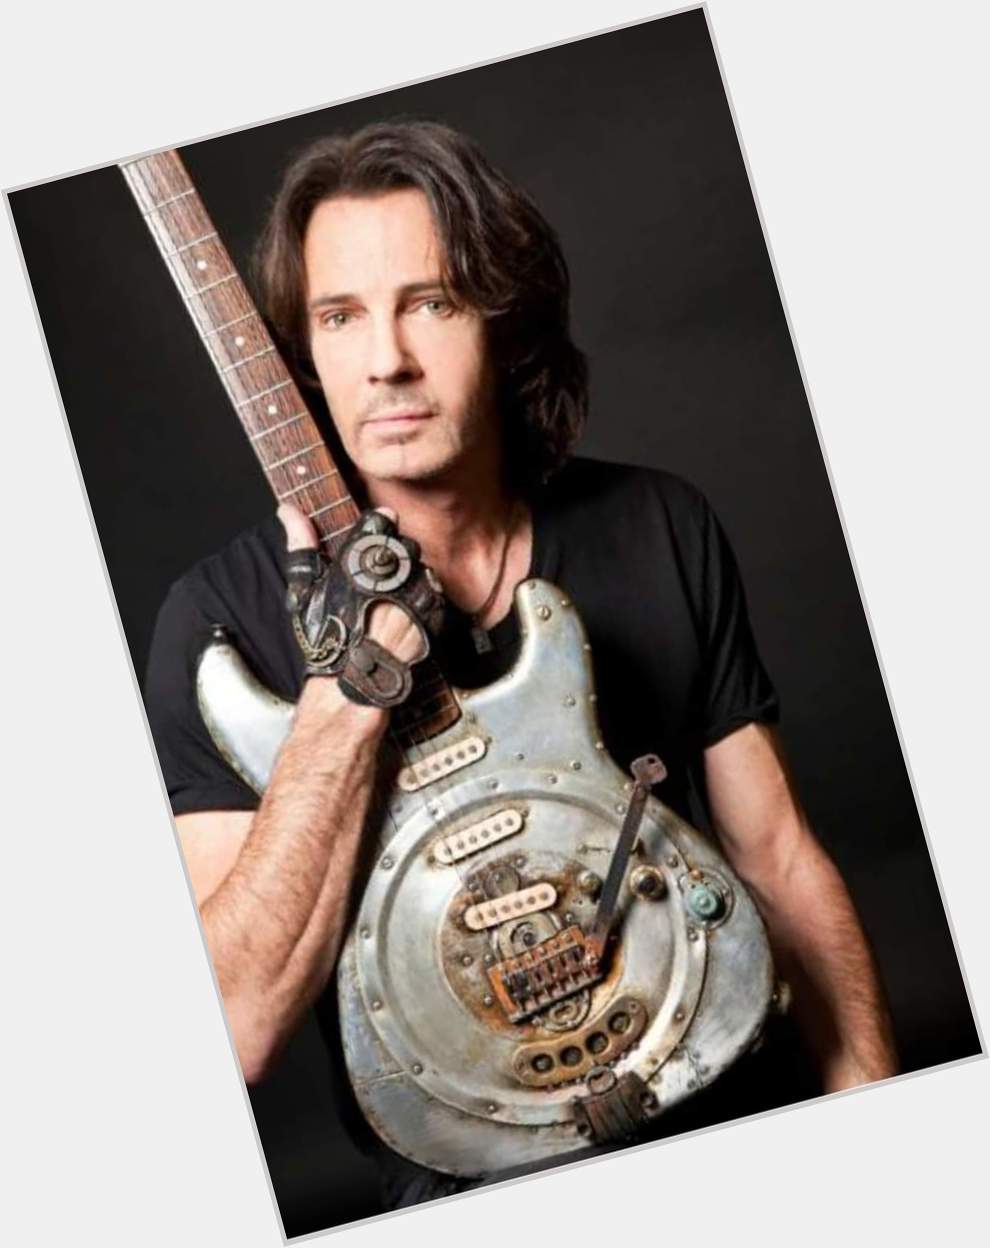 Happy 72nd Birthday to Rick Springfield!, who still performs like he is 30.  